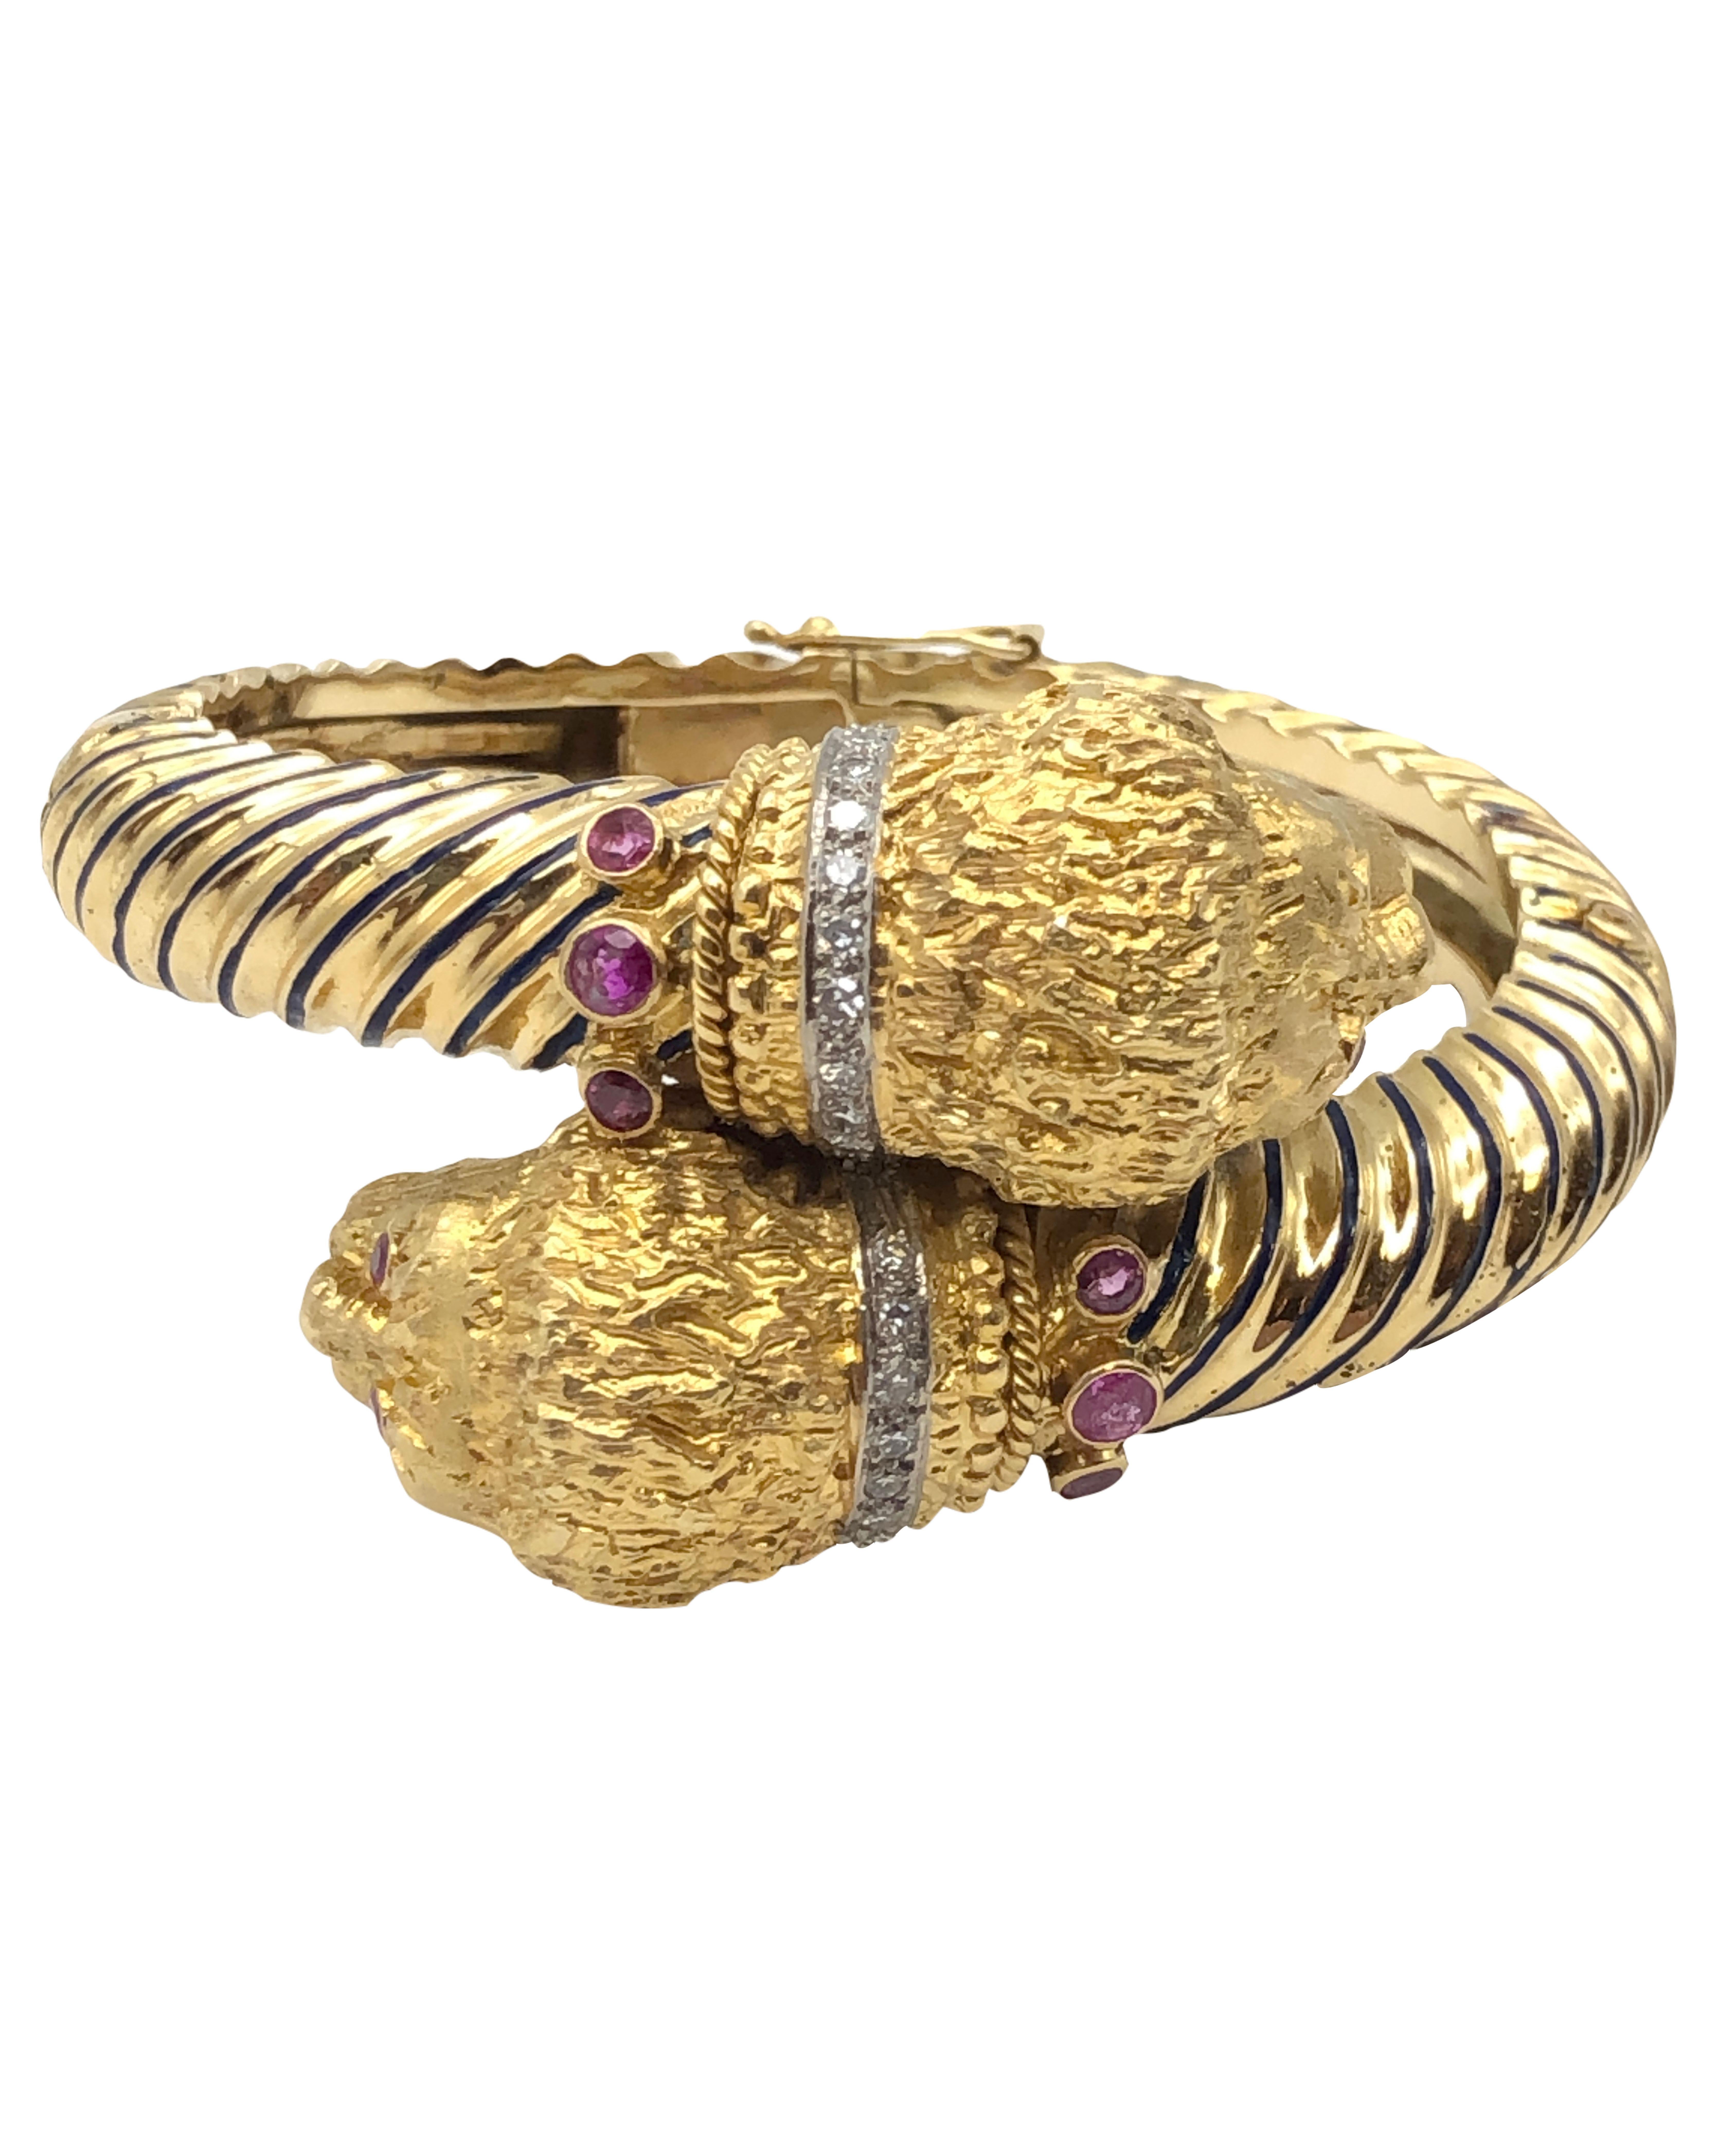 Circa 1970s Ilias LaLaounis Large and impressive 18k Yellow Gold Chimera Bracelet, the Chimera Heads each measure  3/8 X 3/4 inch, and are finely Detailed and Textured, each head having a Diamond set Collar, a Ruby collar and Ruby Eyes. the Heads